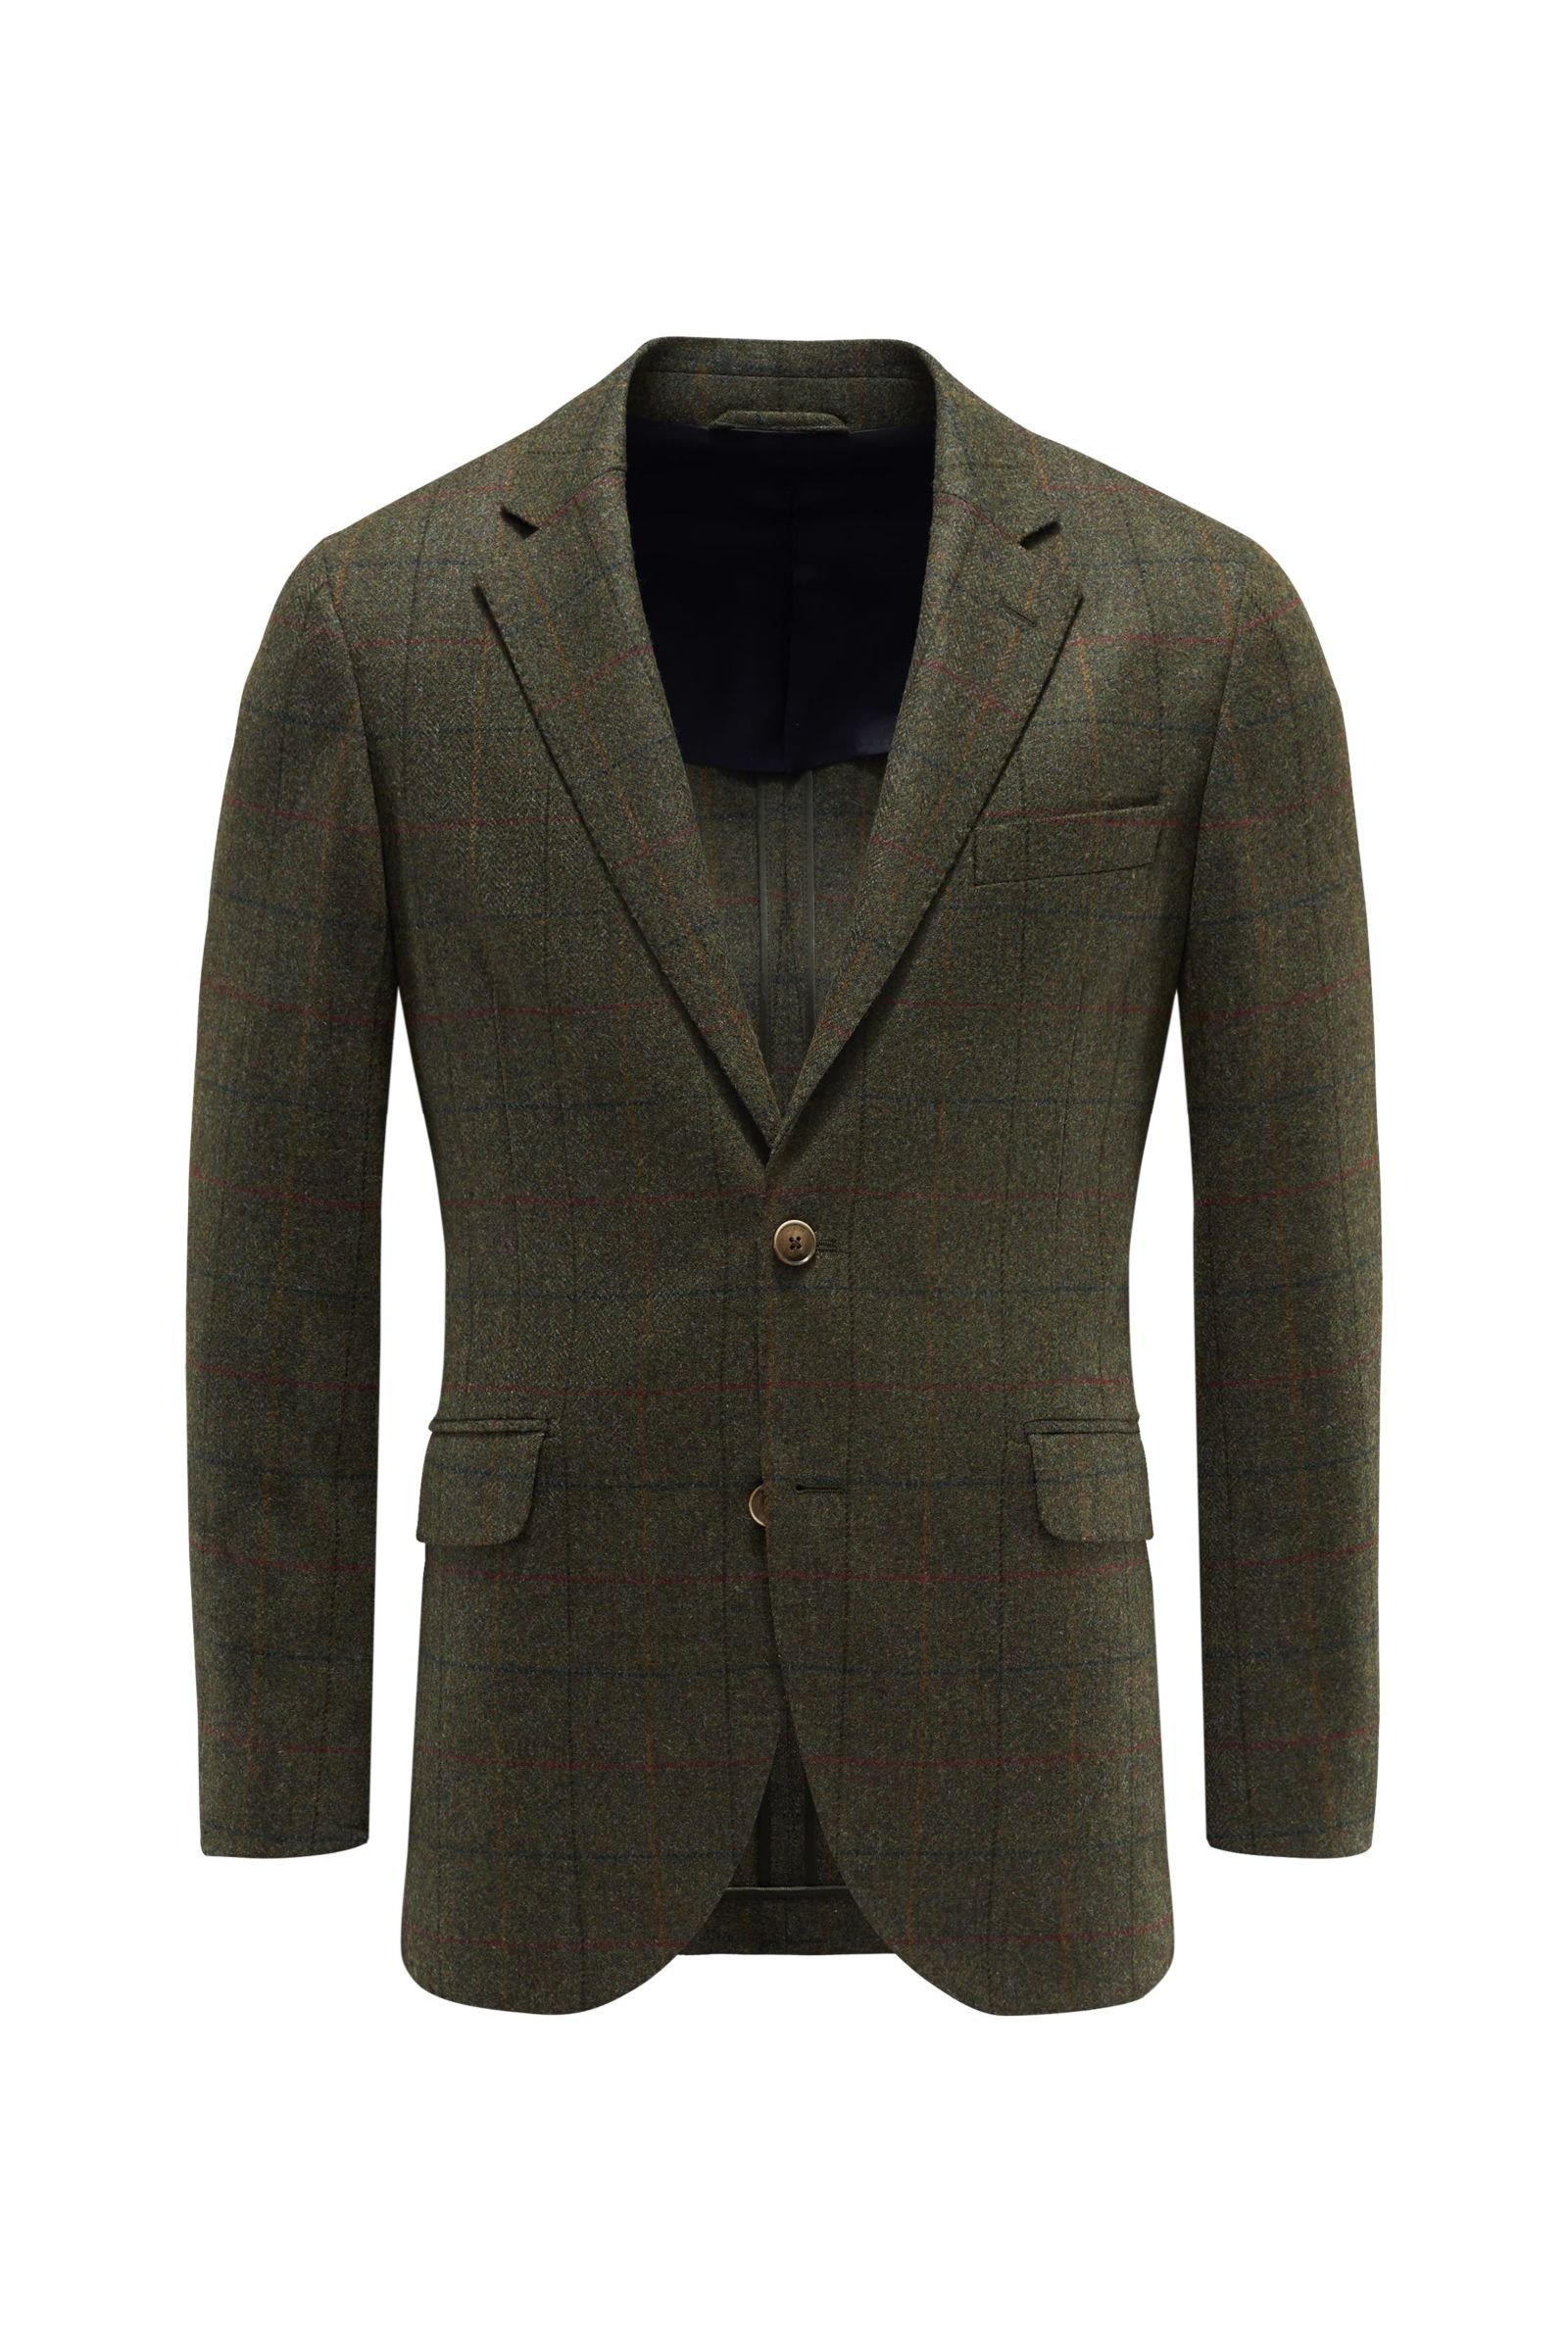 Smart-casual jacket grey-brown checked